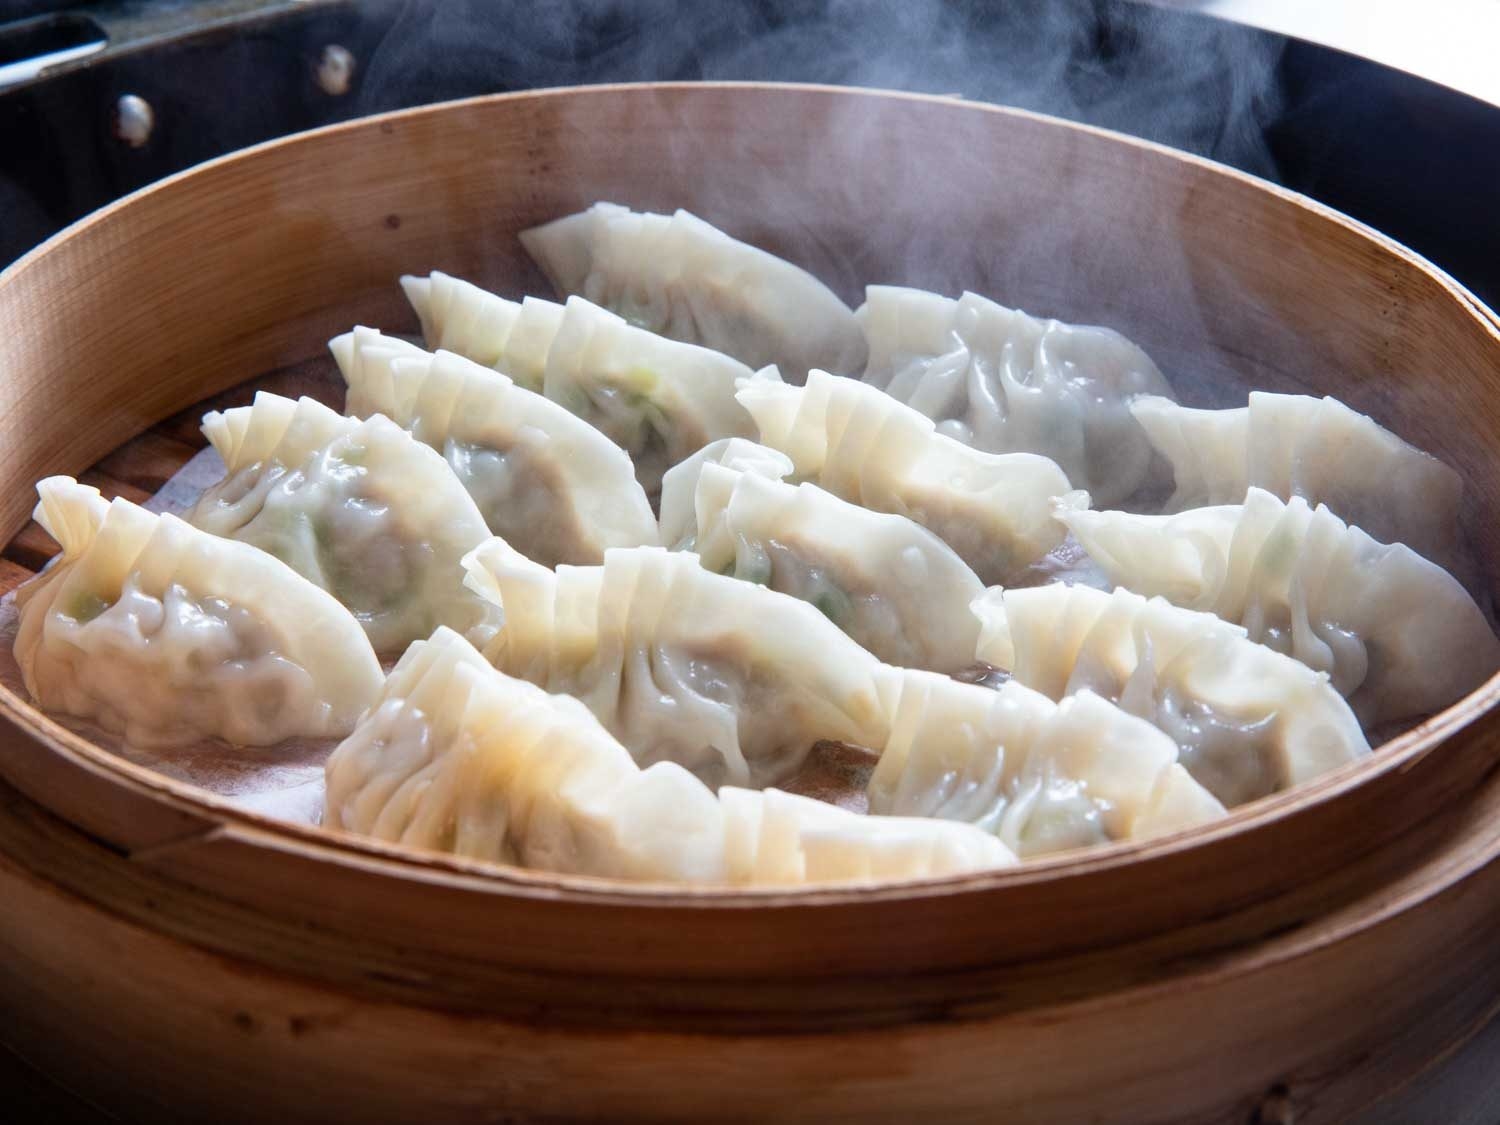 These Are the 10 Luckiest Foods You Can Eat on Chinese New Year